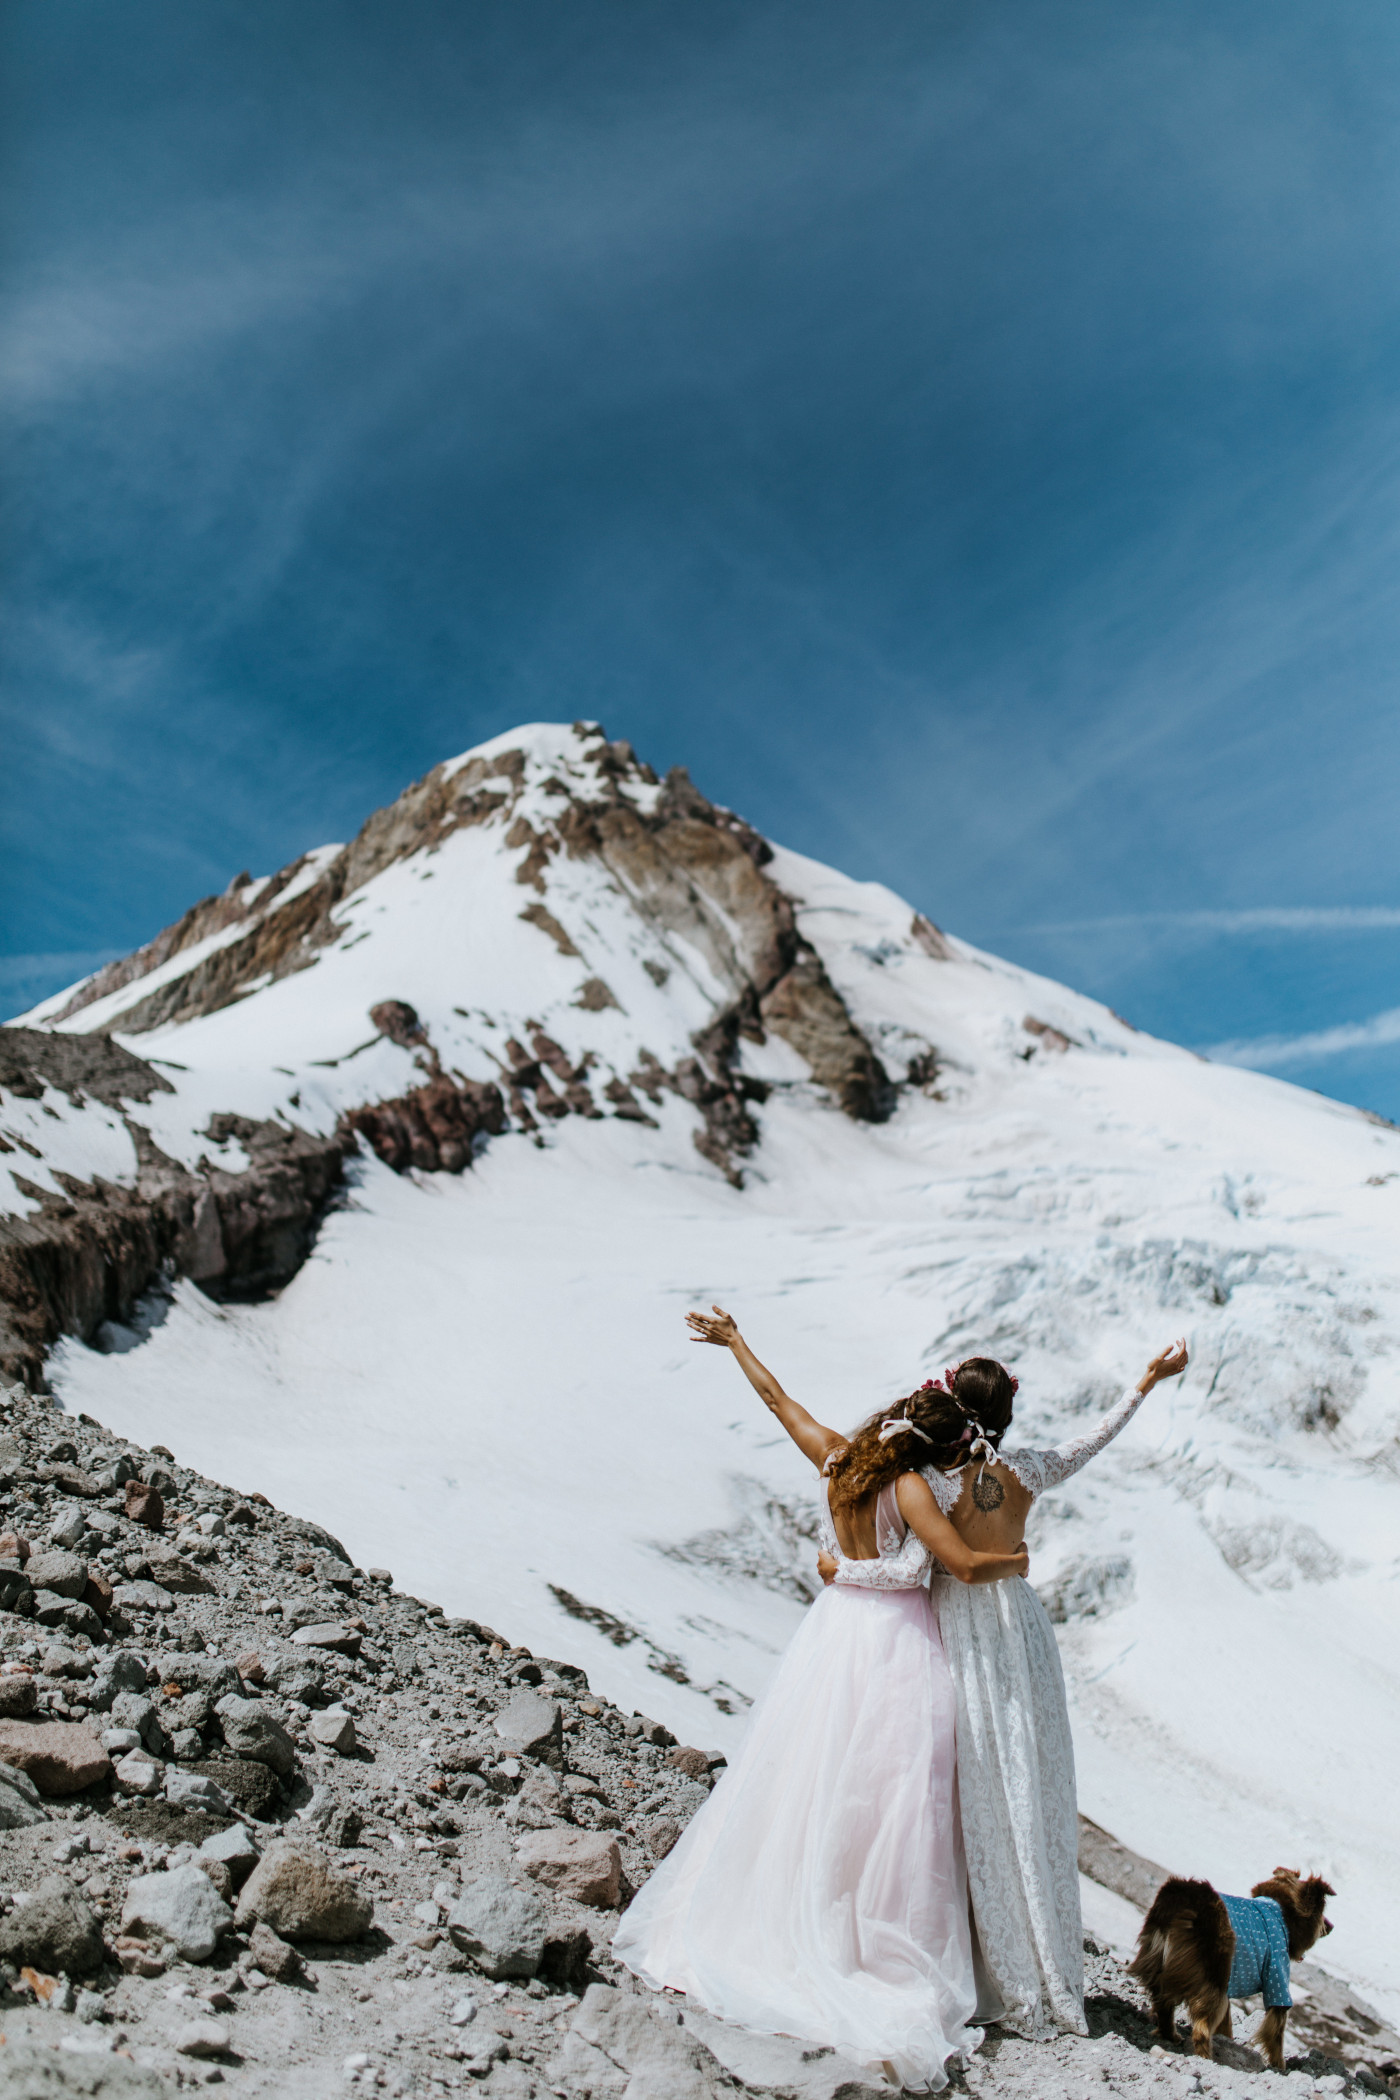 Margaux and Heather hug and celebrate. Elopement photography at Mount Hood by Sienna Plus Josh.